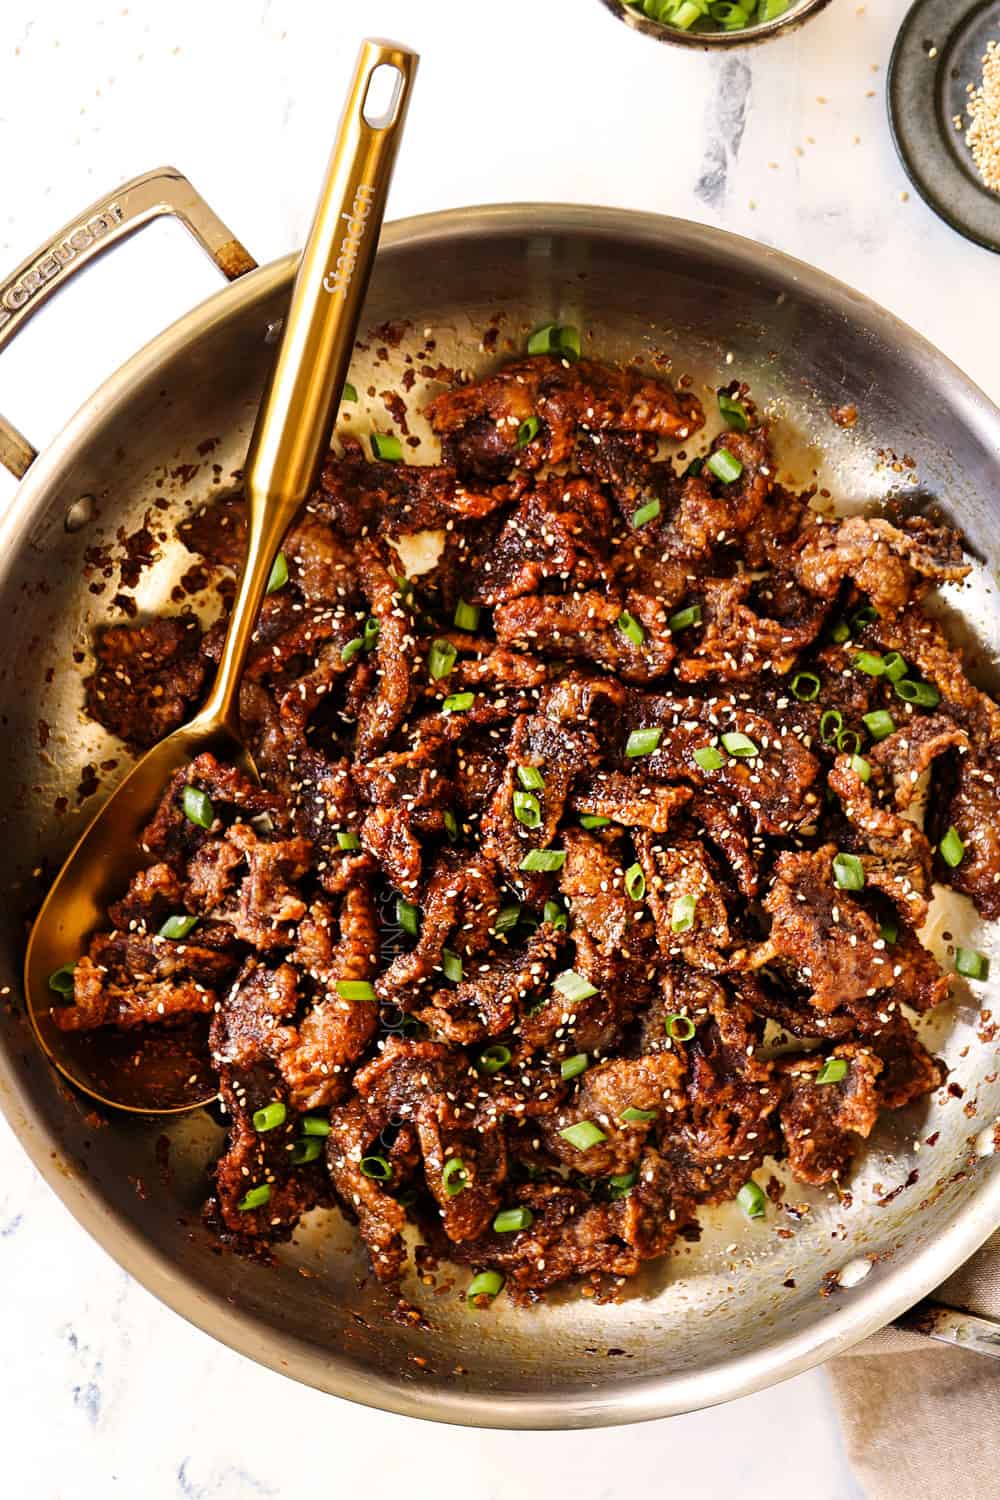 showing how to make Ginger Beef recipe by tossing the fried beef in the sauce